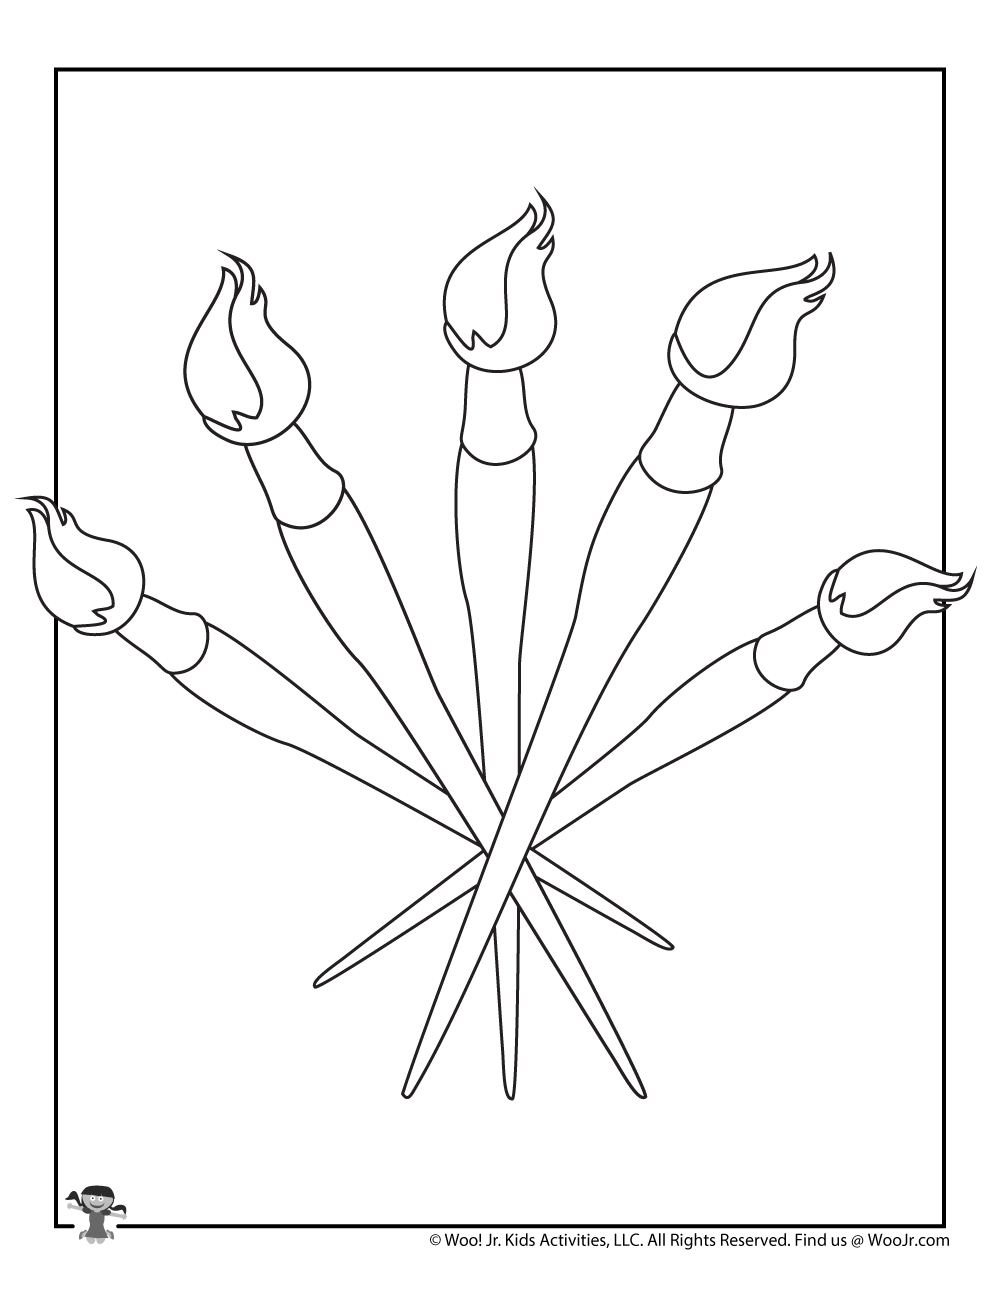 Art Paint Brushes Coloring Page for Kids | Woo! Jr. Kids Activities :  Children's Publishing